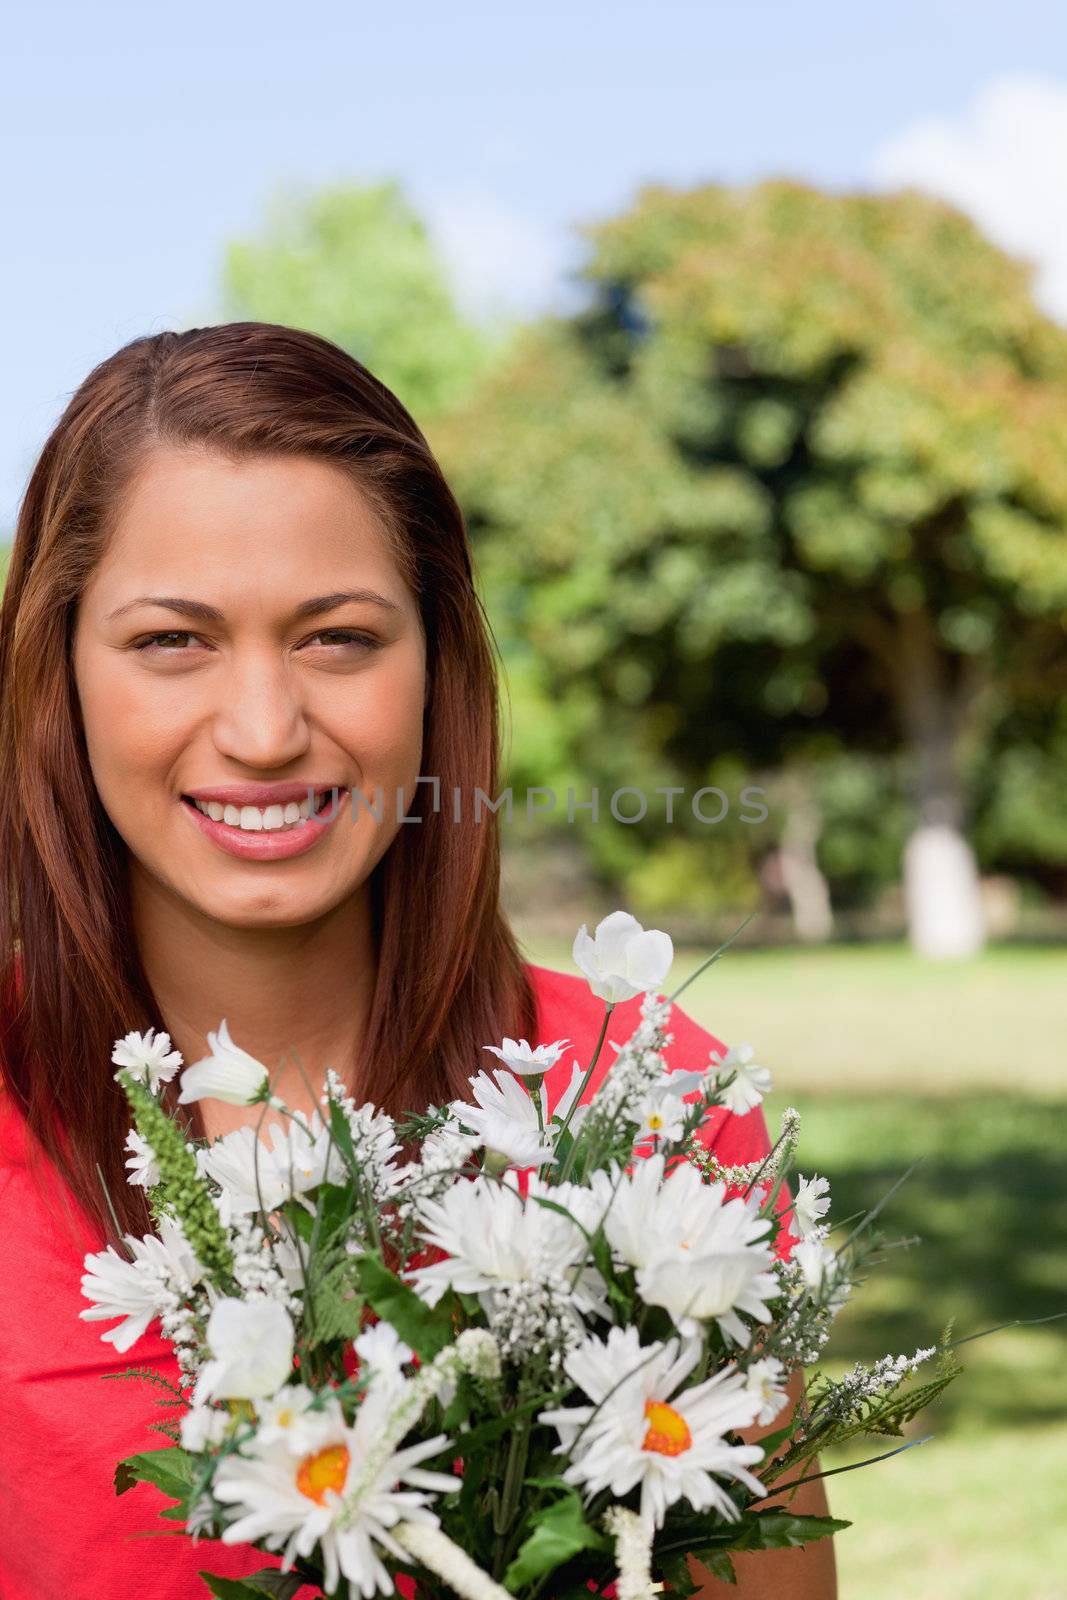 Young woman with the sun shining on her face, looking ahead while holding a bunch of flowers